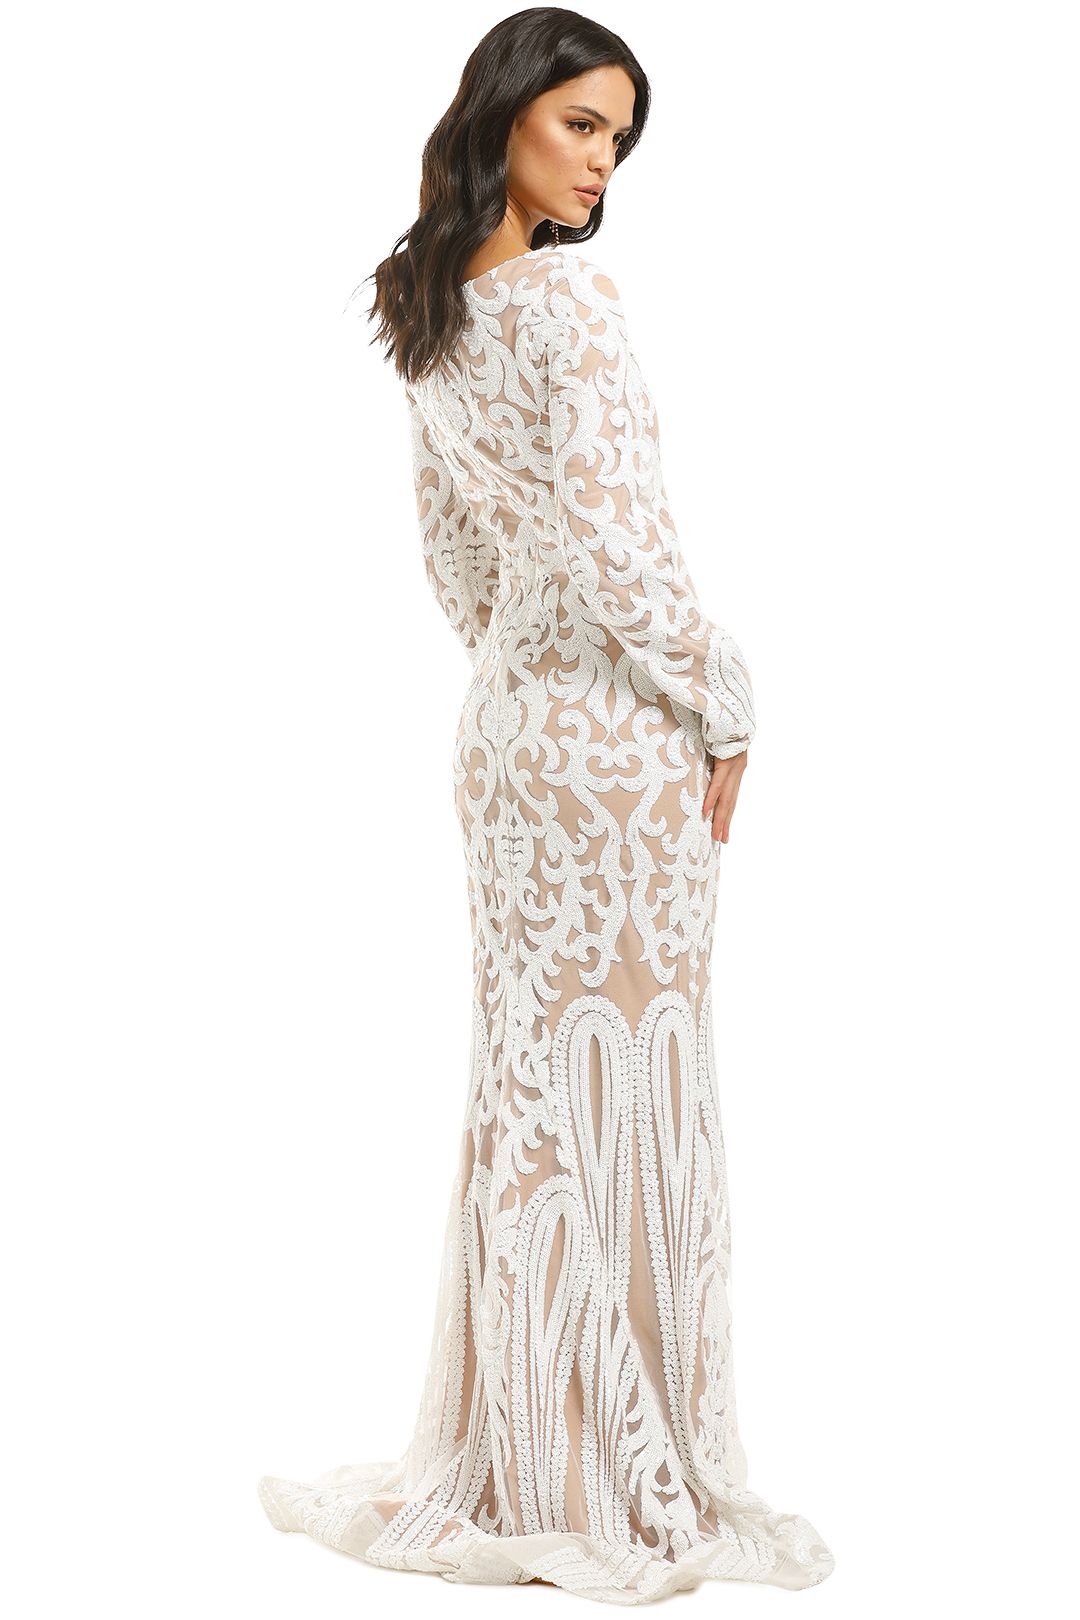 Tinaholy-Scoop-Long-Sleeve-Gown-White-Nude-Back